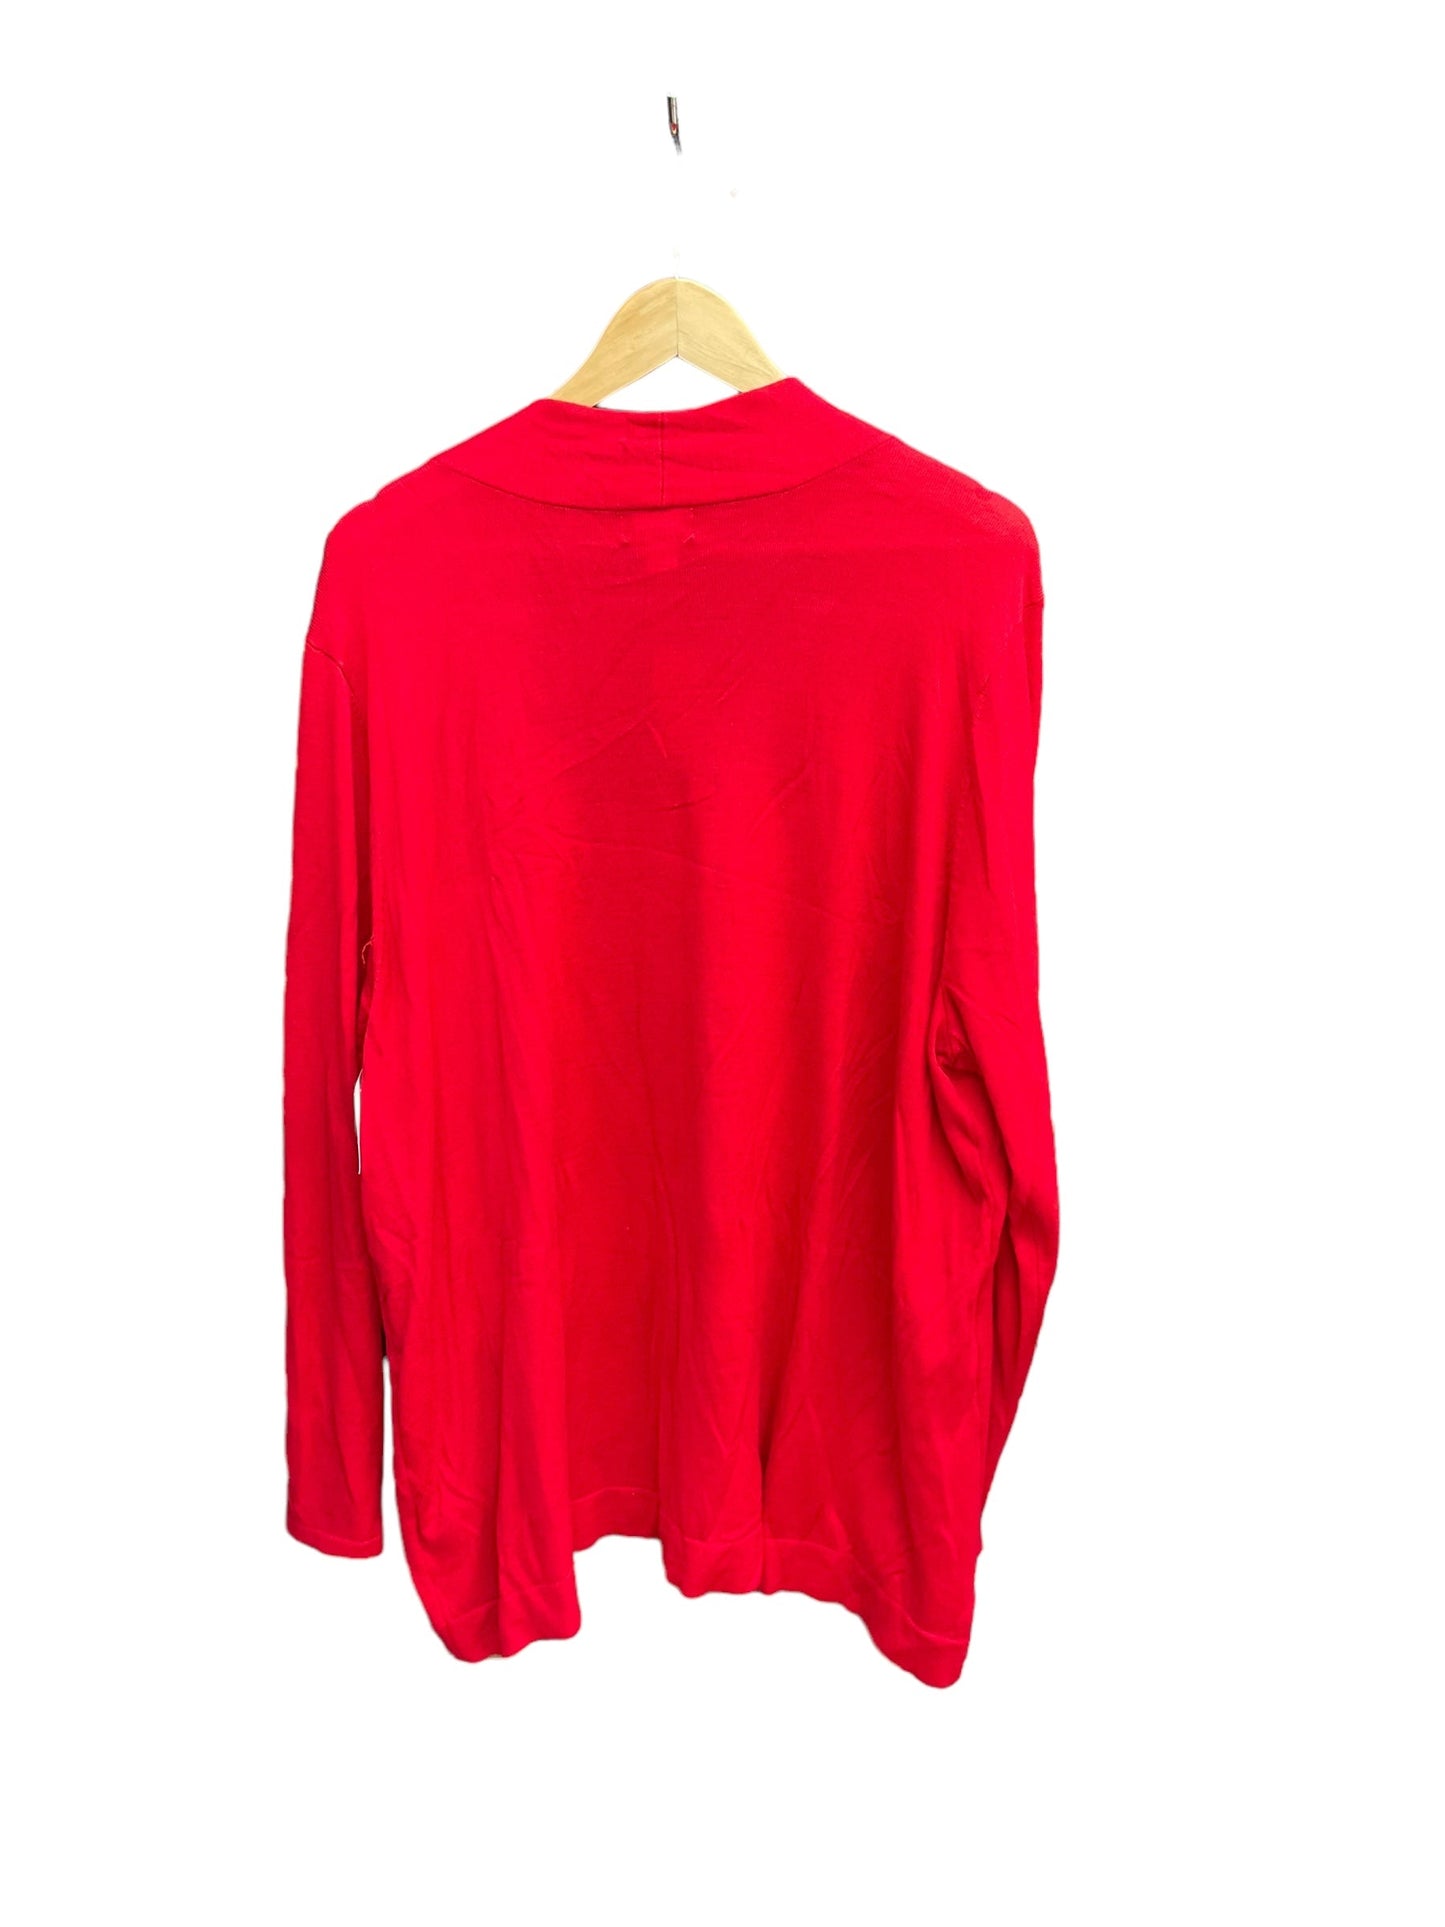 Red Top Long Sleeve Basic Editions, Size 3x